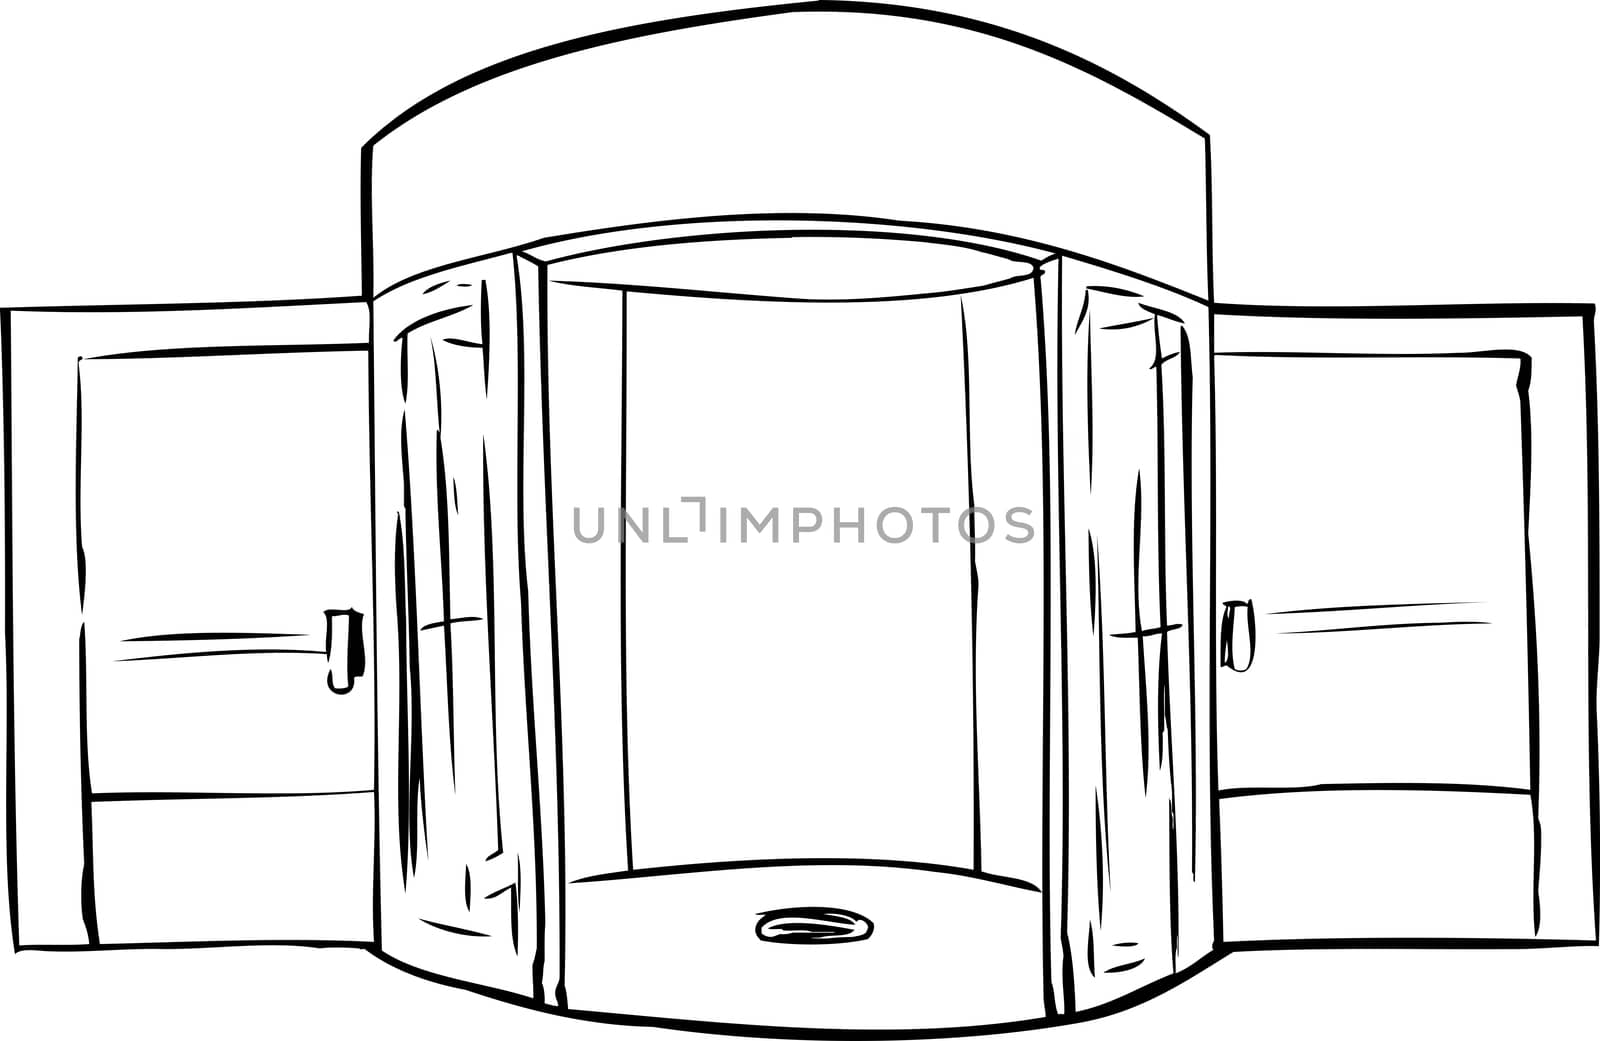 Outline of entrance with missing revolving door